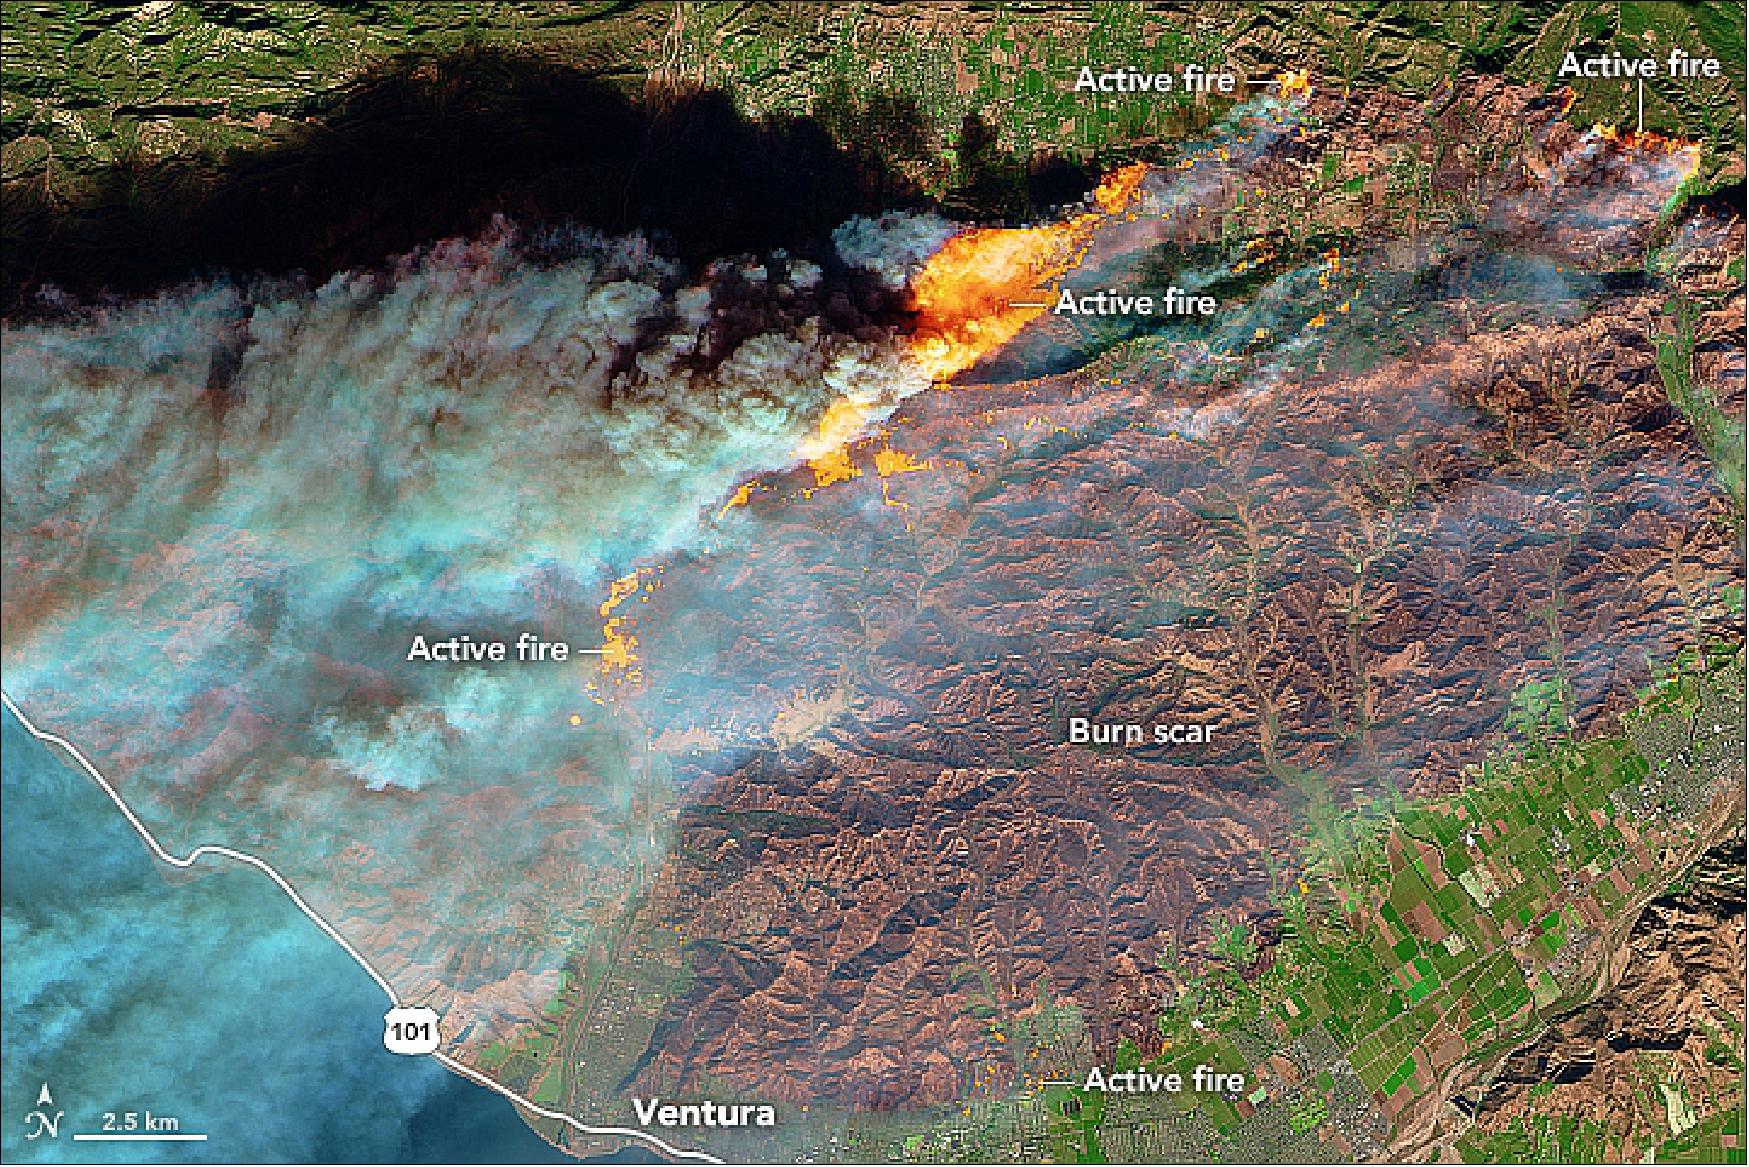 Figure 52: MSI image of the Ventura County fire acquired on 5 Dec. 2017 (image credit: ESA, the image contains modified Copernicus Sentinel data (2017) processed by the European Space Agency)